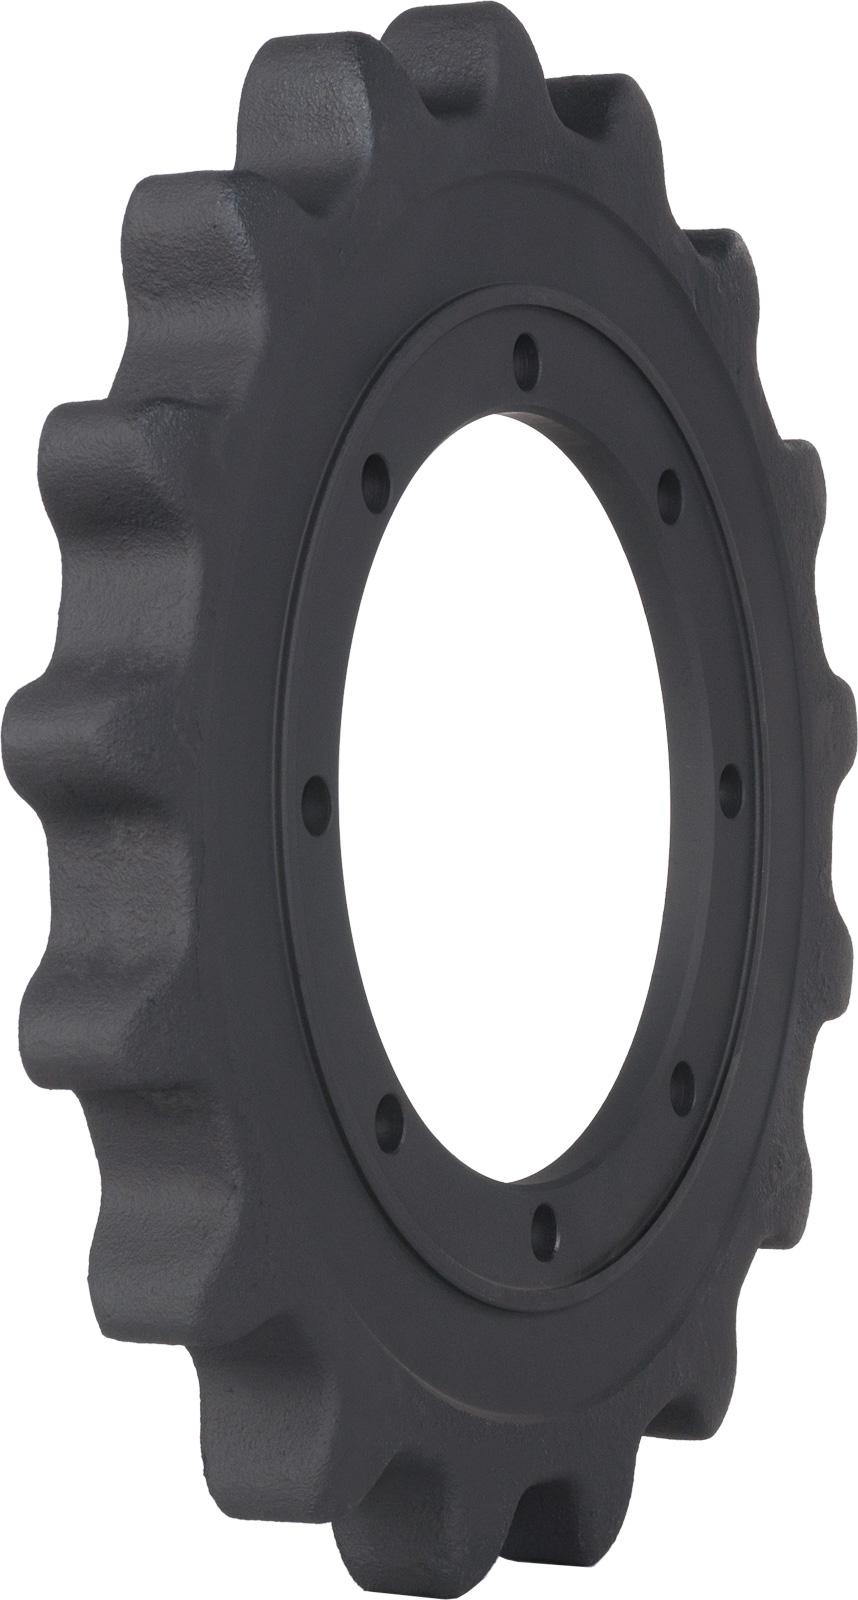 sprocket for john deere ct329 (up to 192142), 332, 333d (up to 192142)